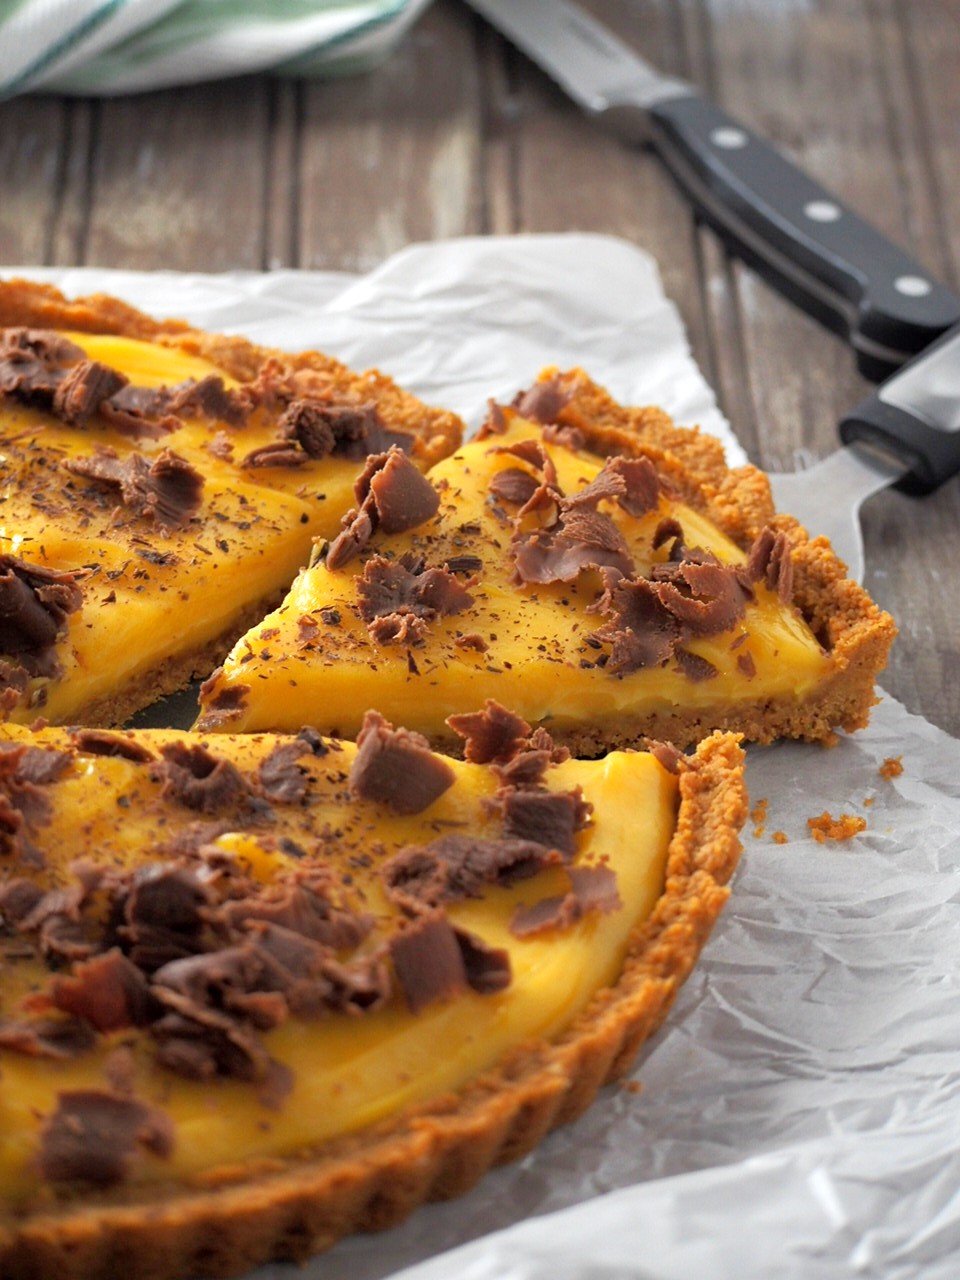 Mango Tart sliced and ready for serving.